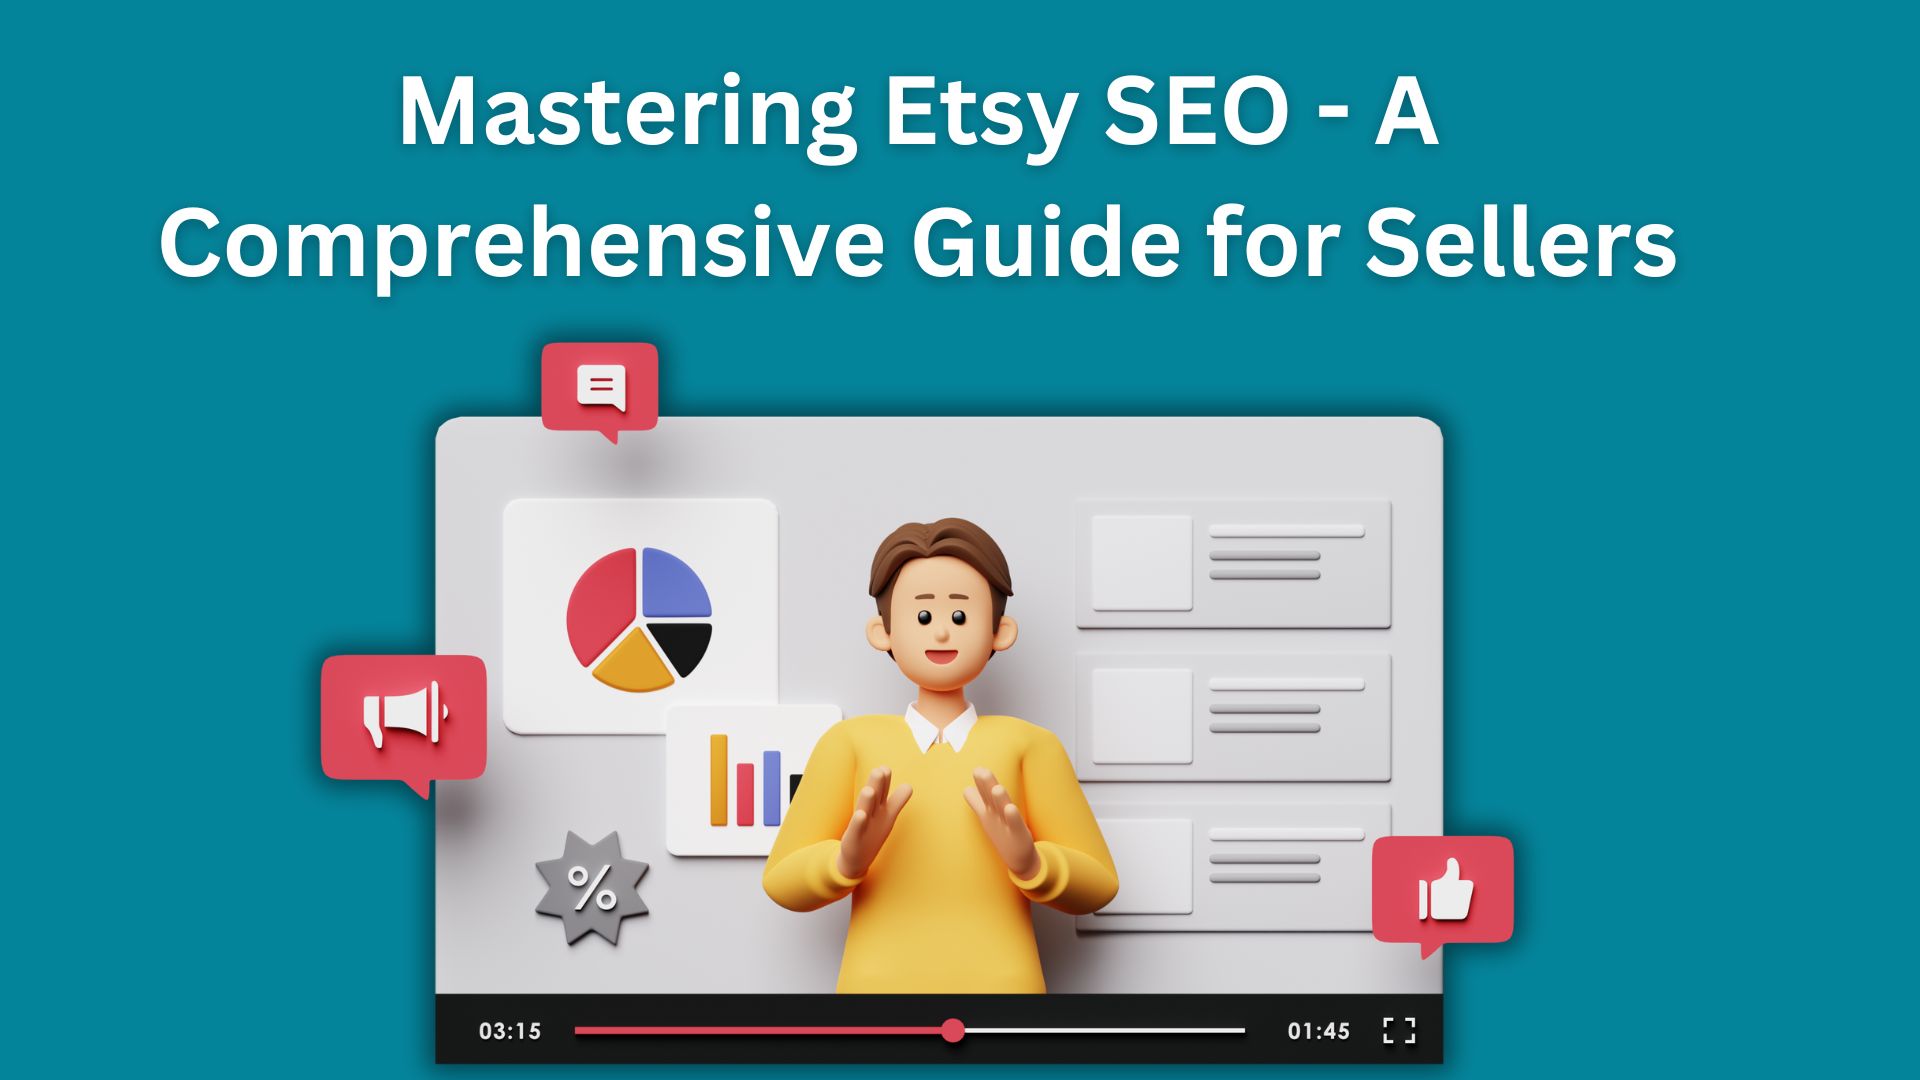 Mastering Etsy SEO - A Comprehensive Guide for Sellers